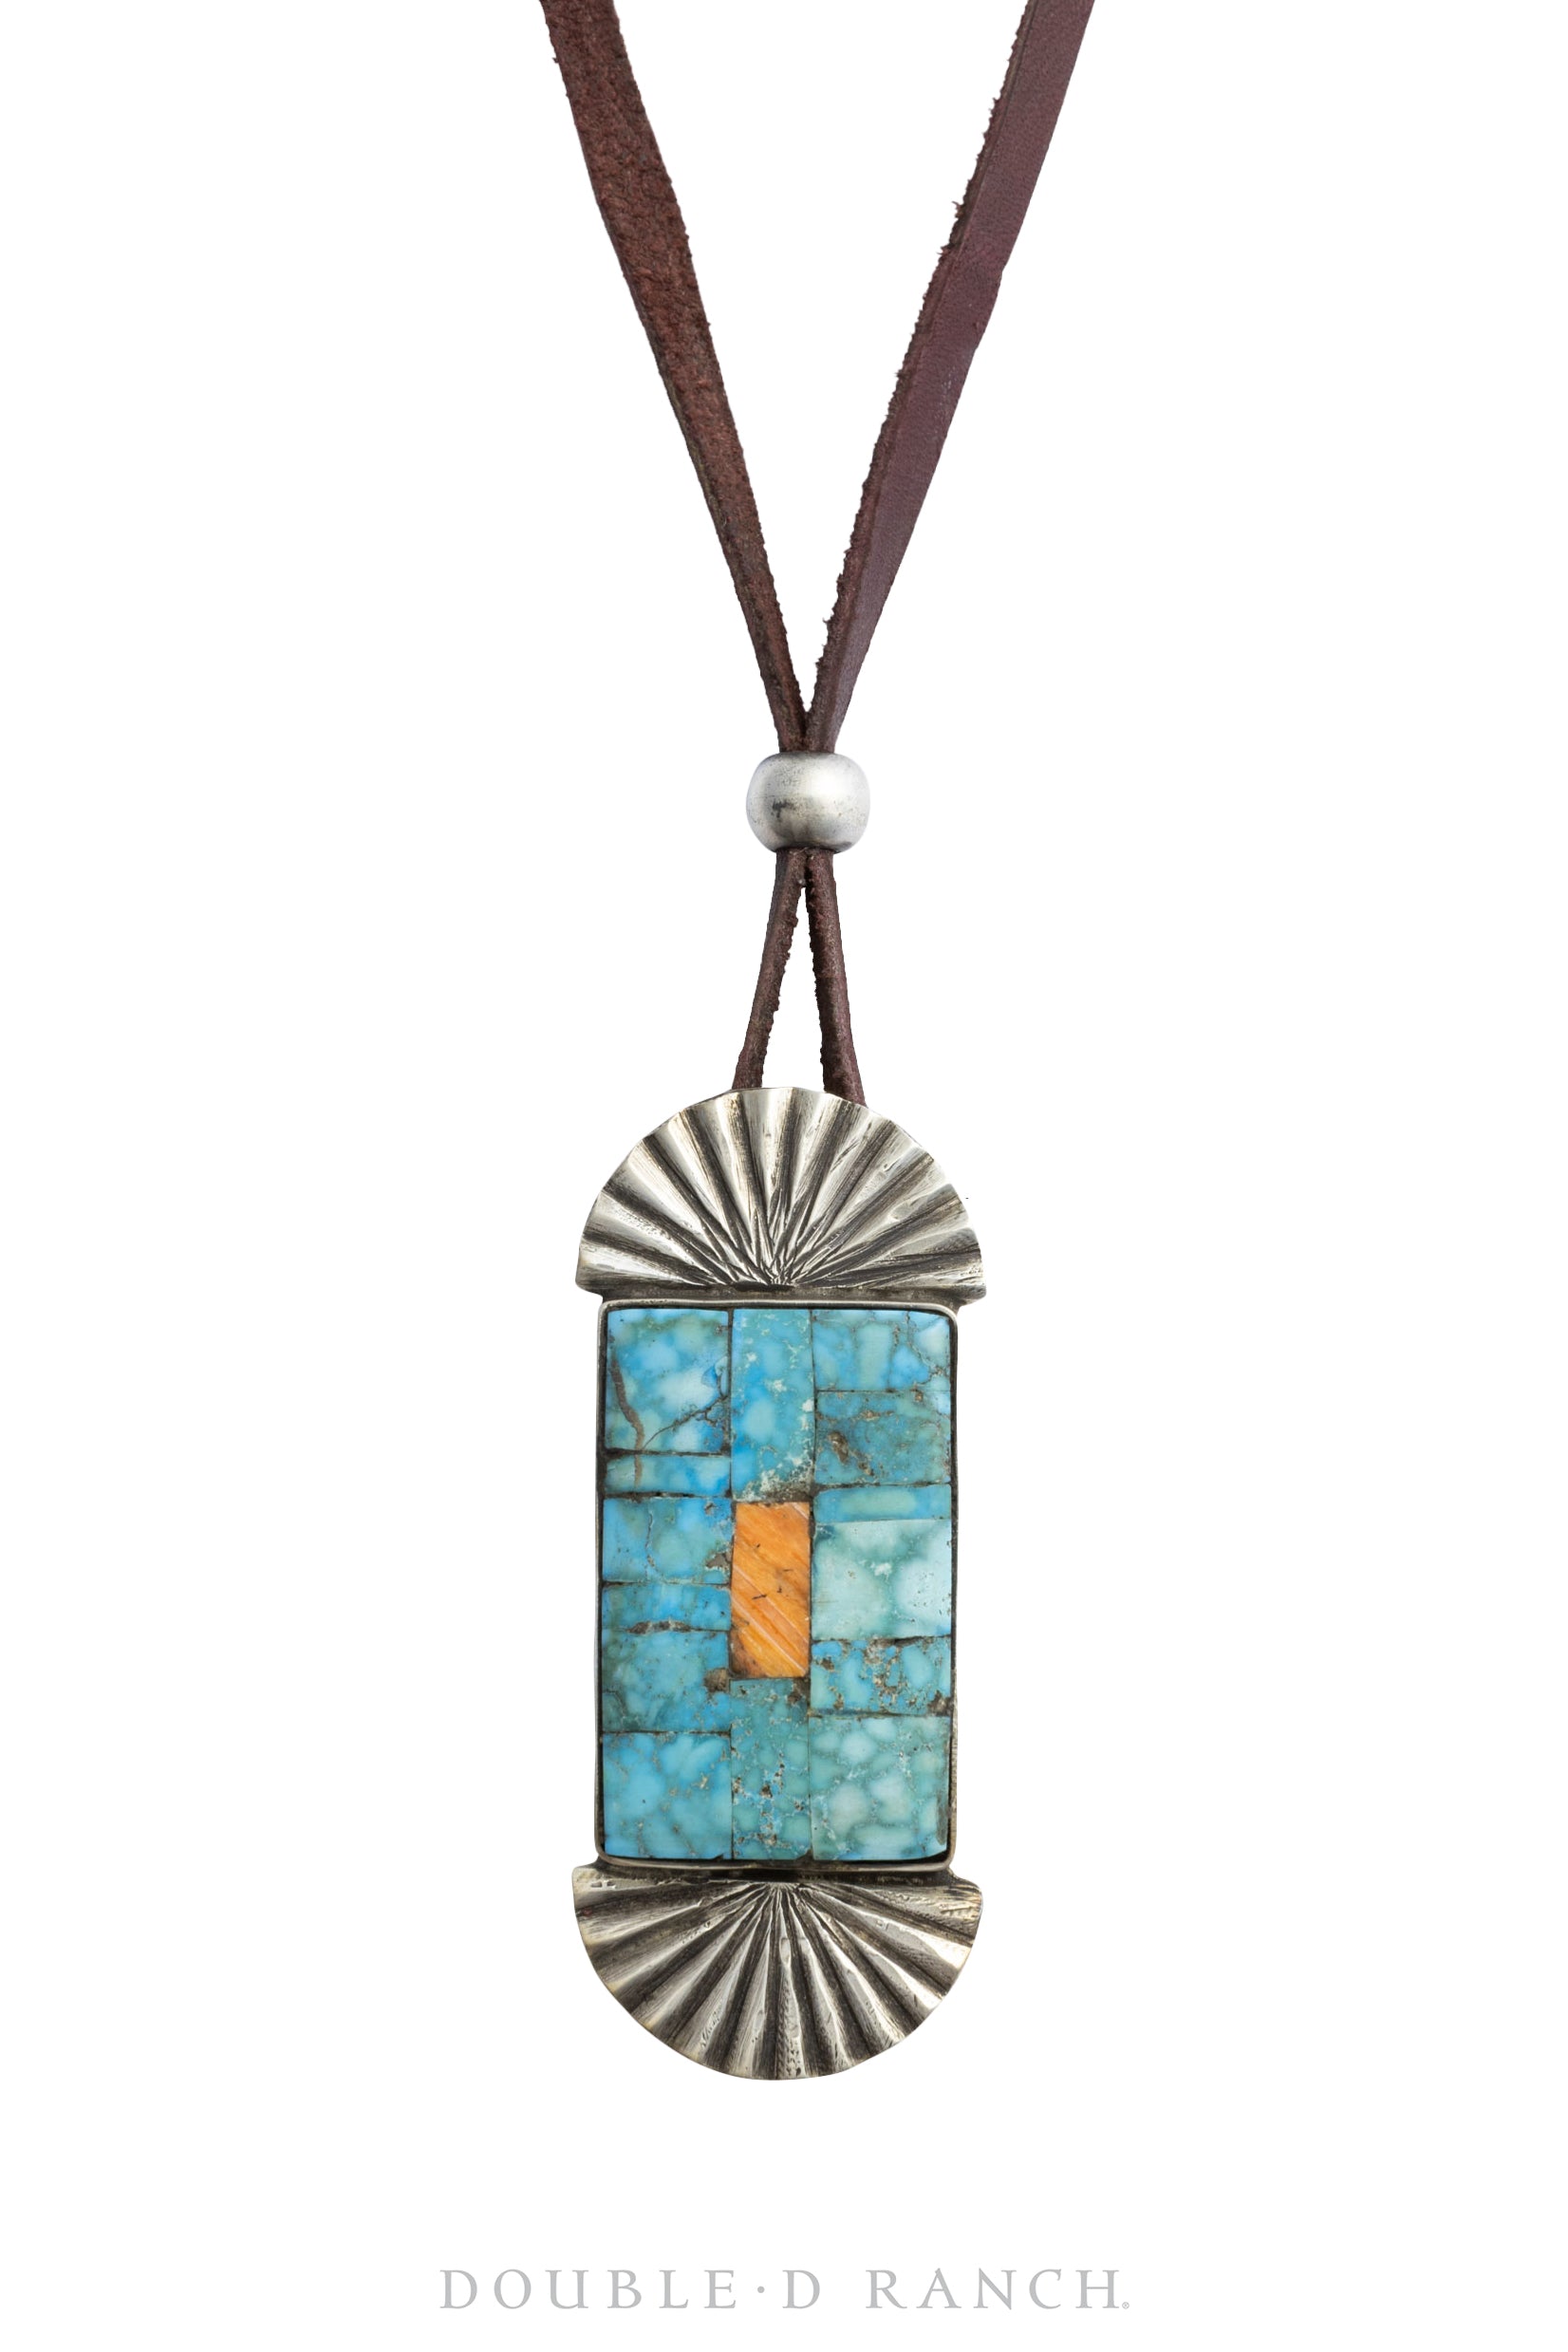 Necklace, Leather Thong, Turquoise With Mixed Stones, Inlay, Jock Favour Hallmark, Artisan, Contemporary, 1882